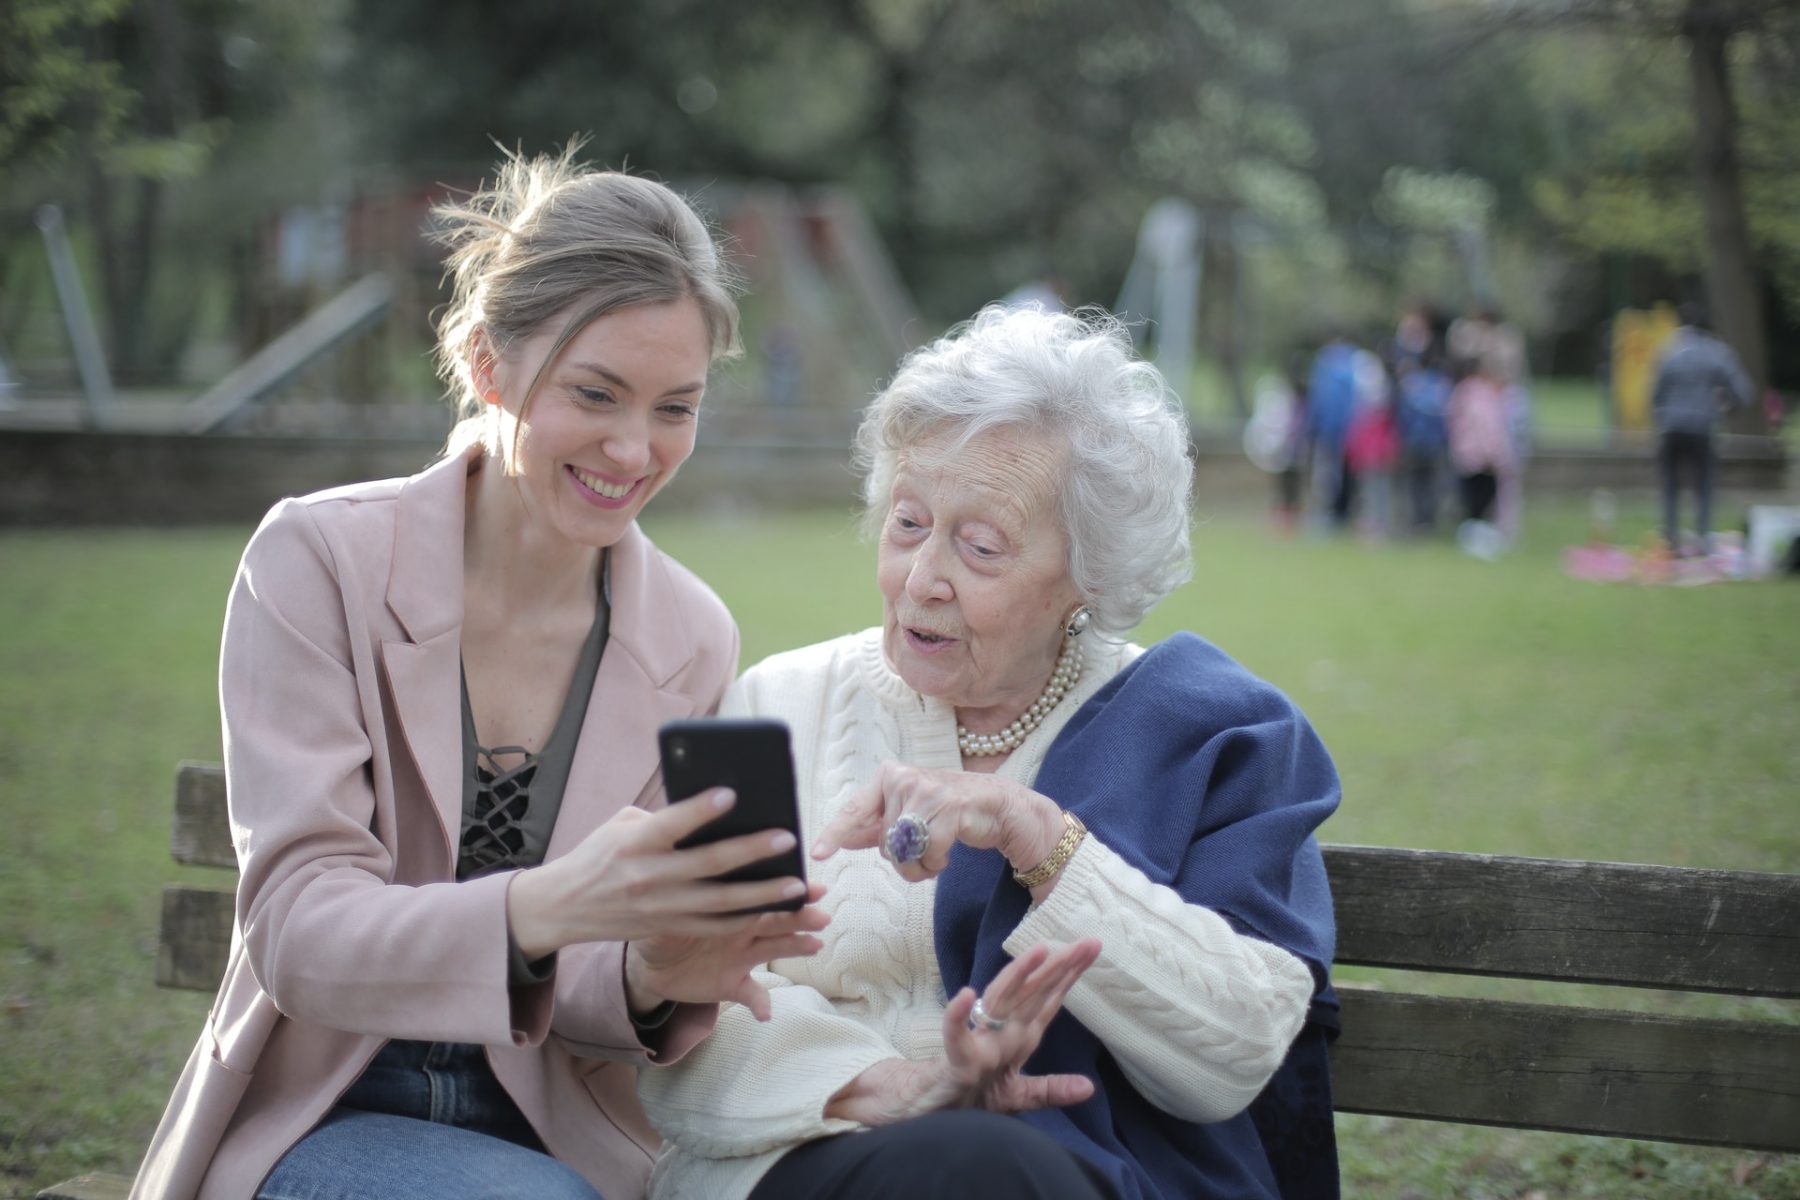 middle aged women showing an elderly women something on her phone while sitting on a park bench